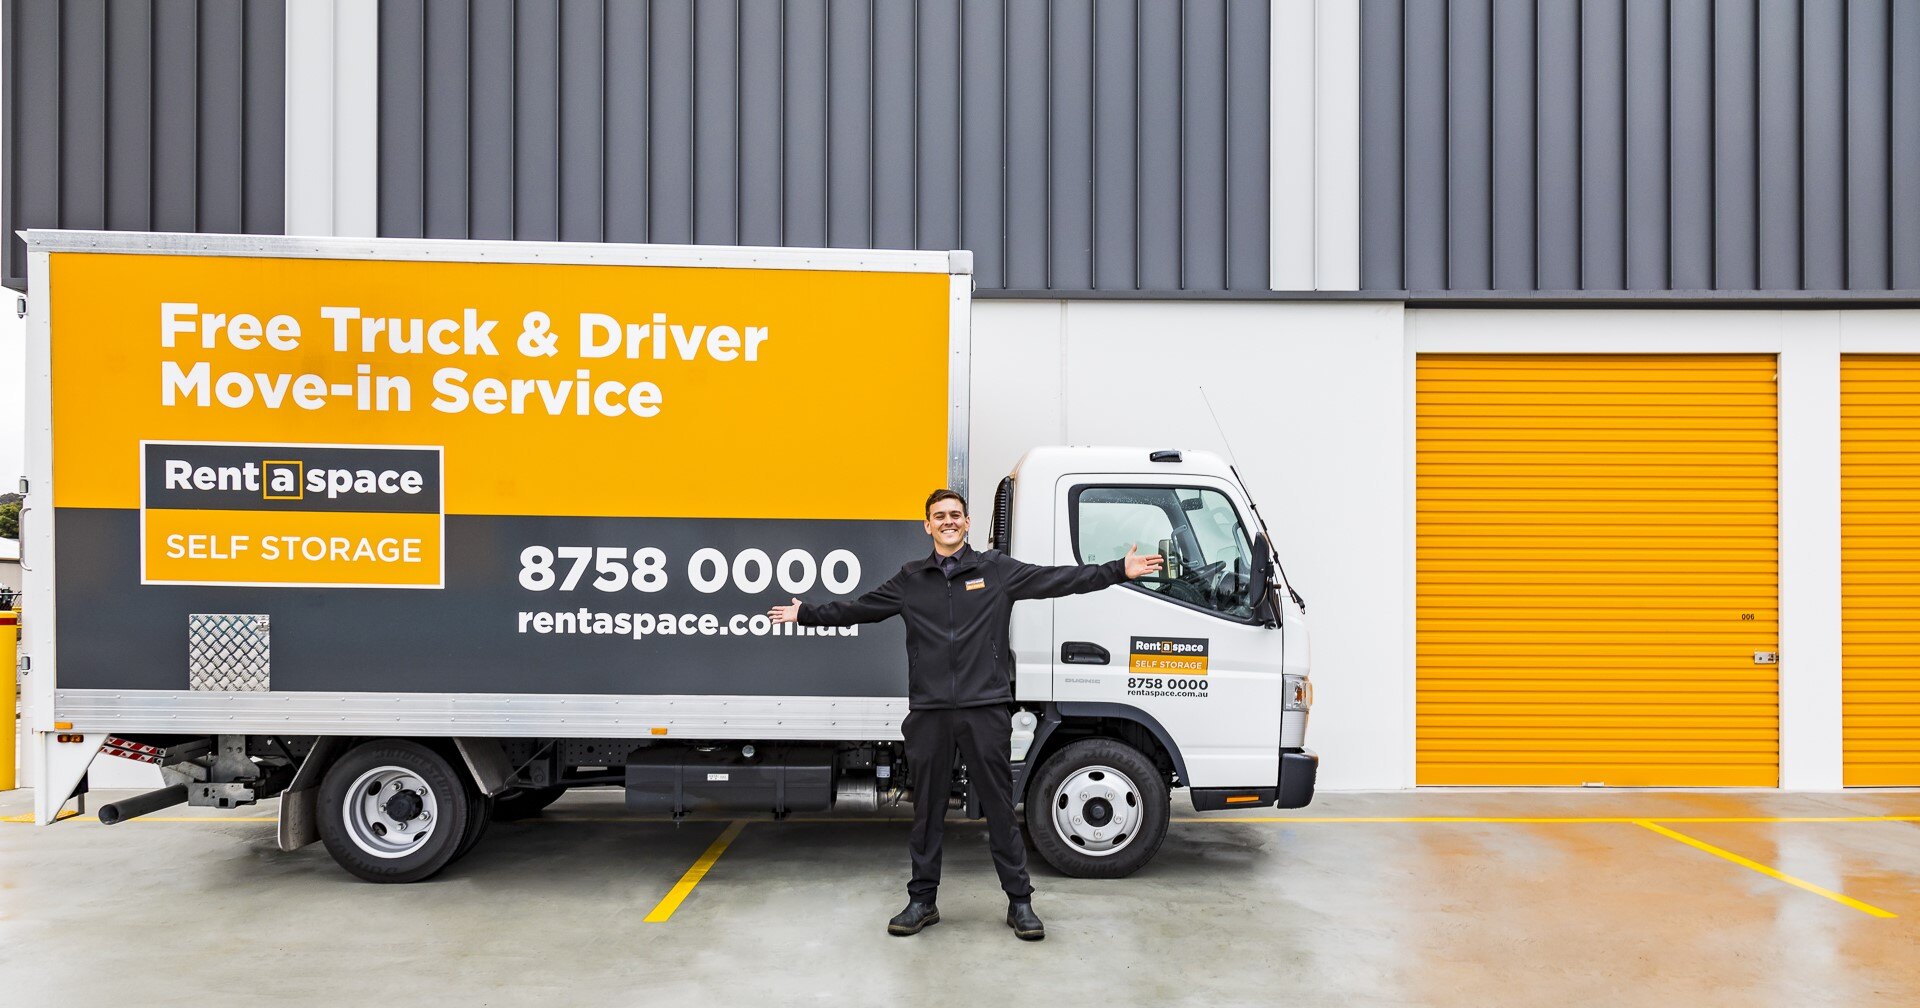 Rent a Space exclusively offers a free storage move in service with a truck and driver